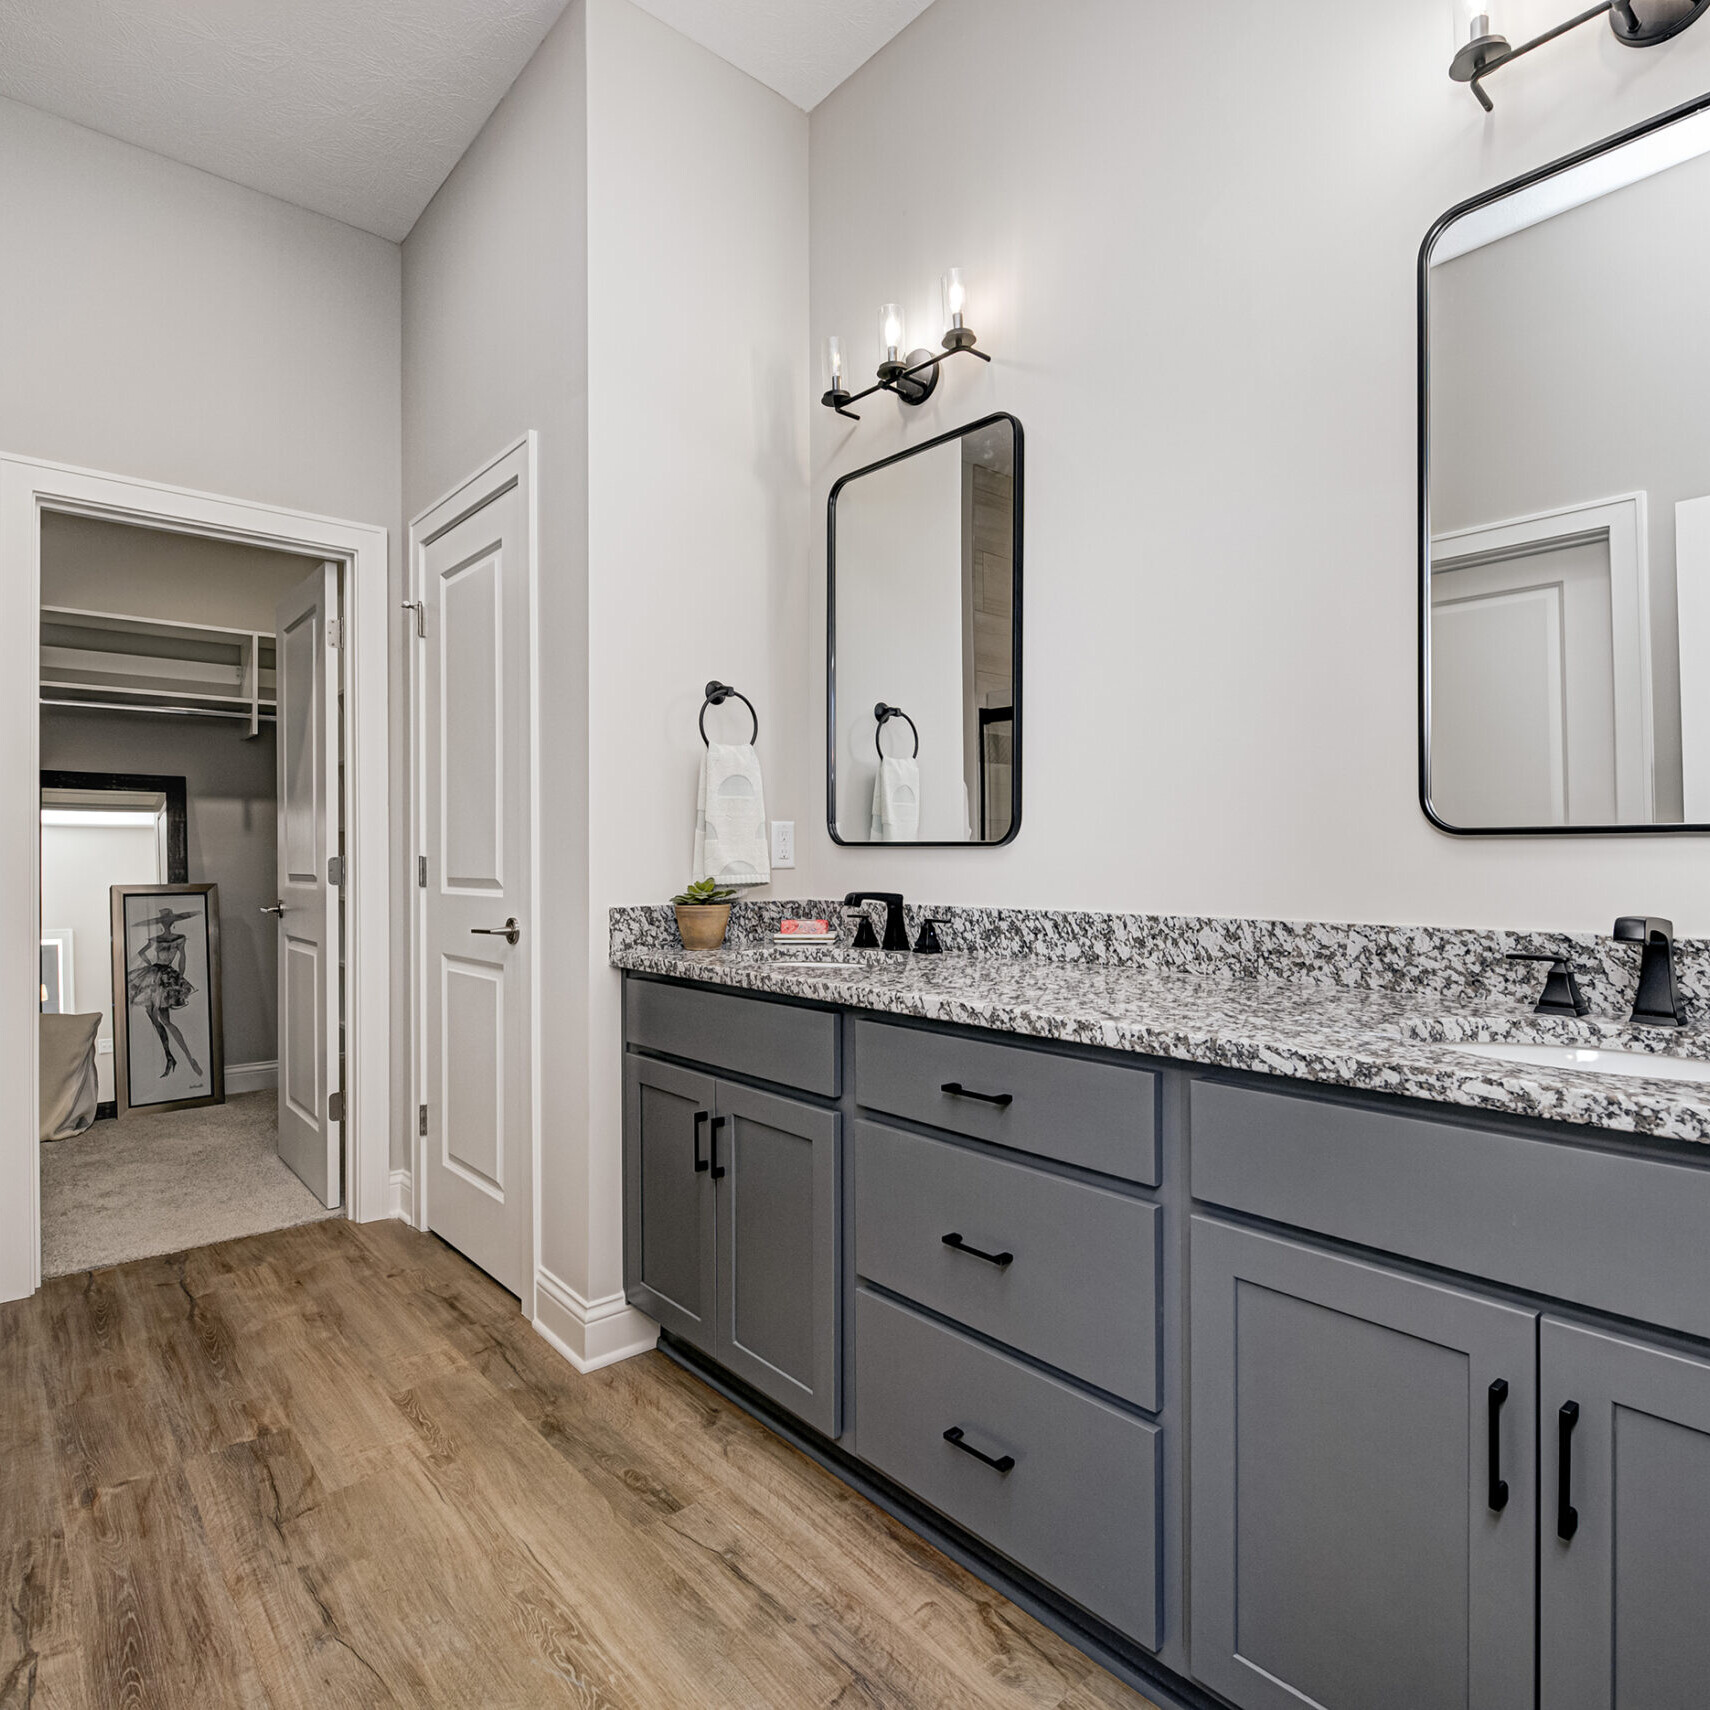 A bathroom with gray cabinets and hardwood floors in a custom home.